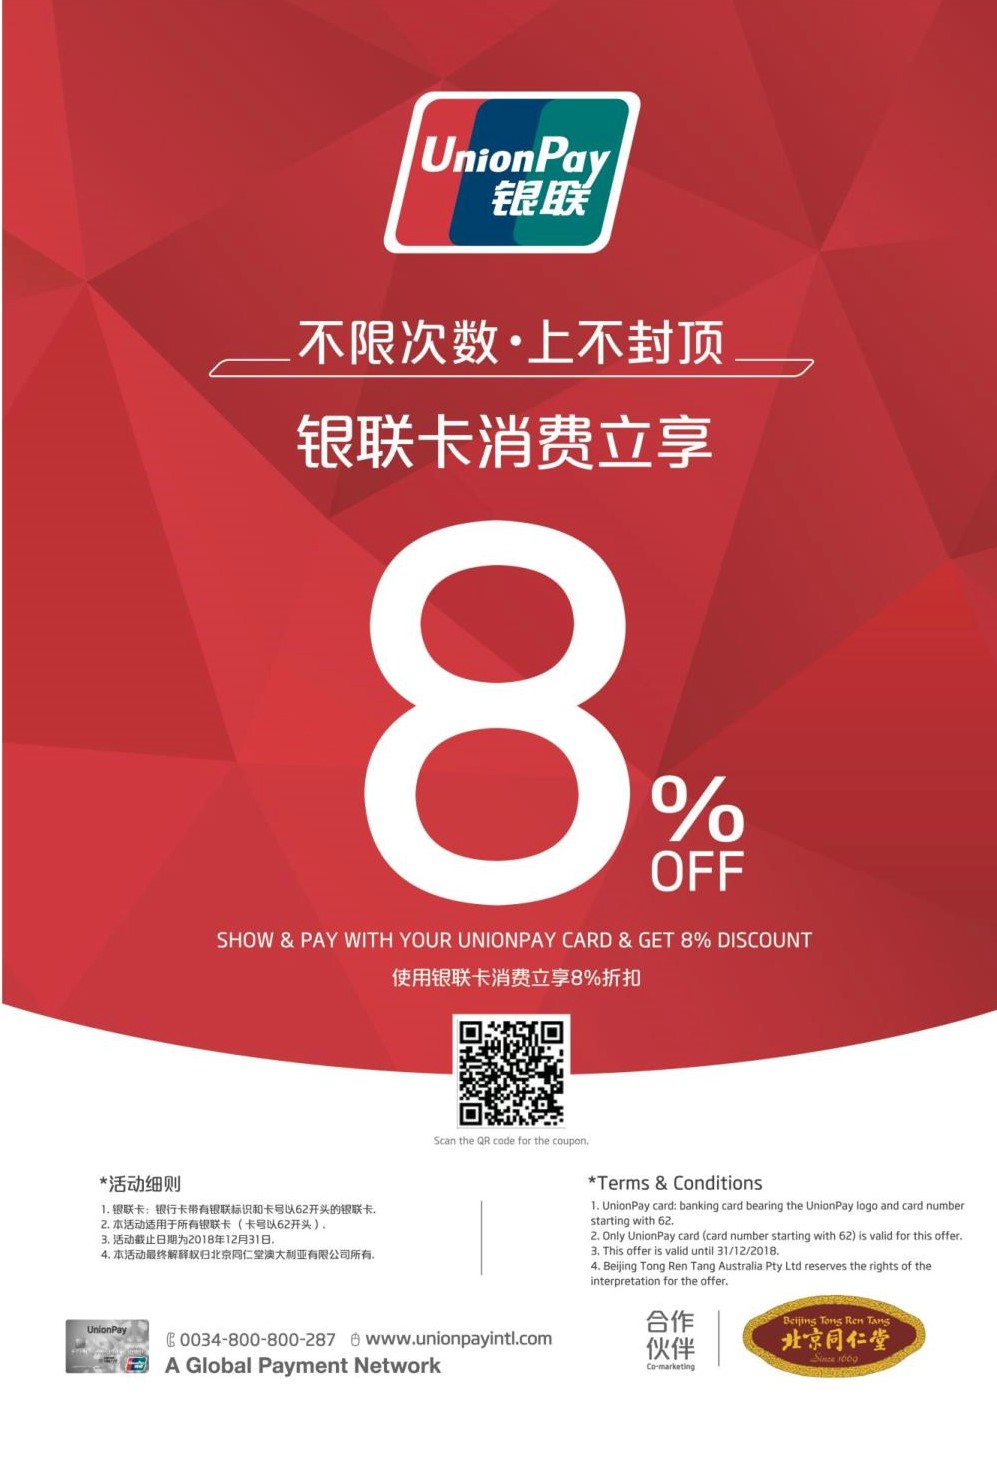 Show & Pay with your Unionpay card & get 8% discount